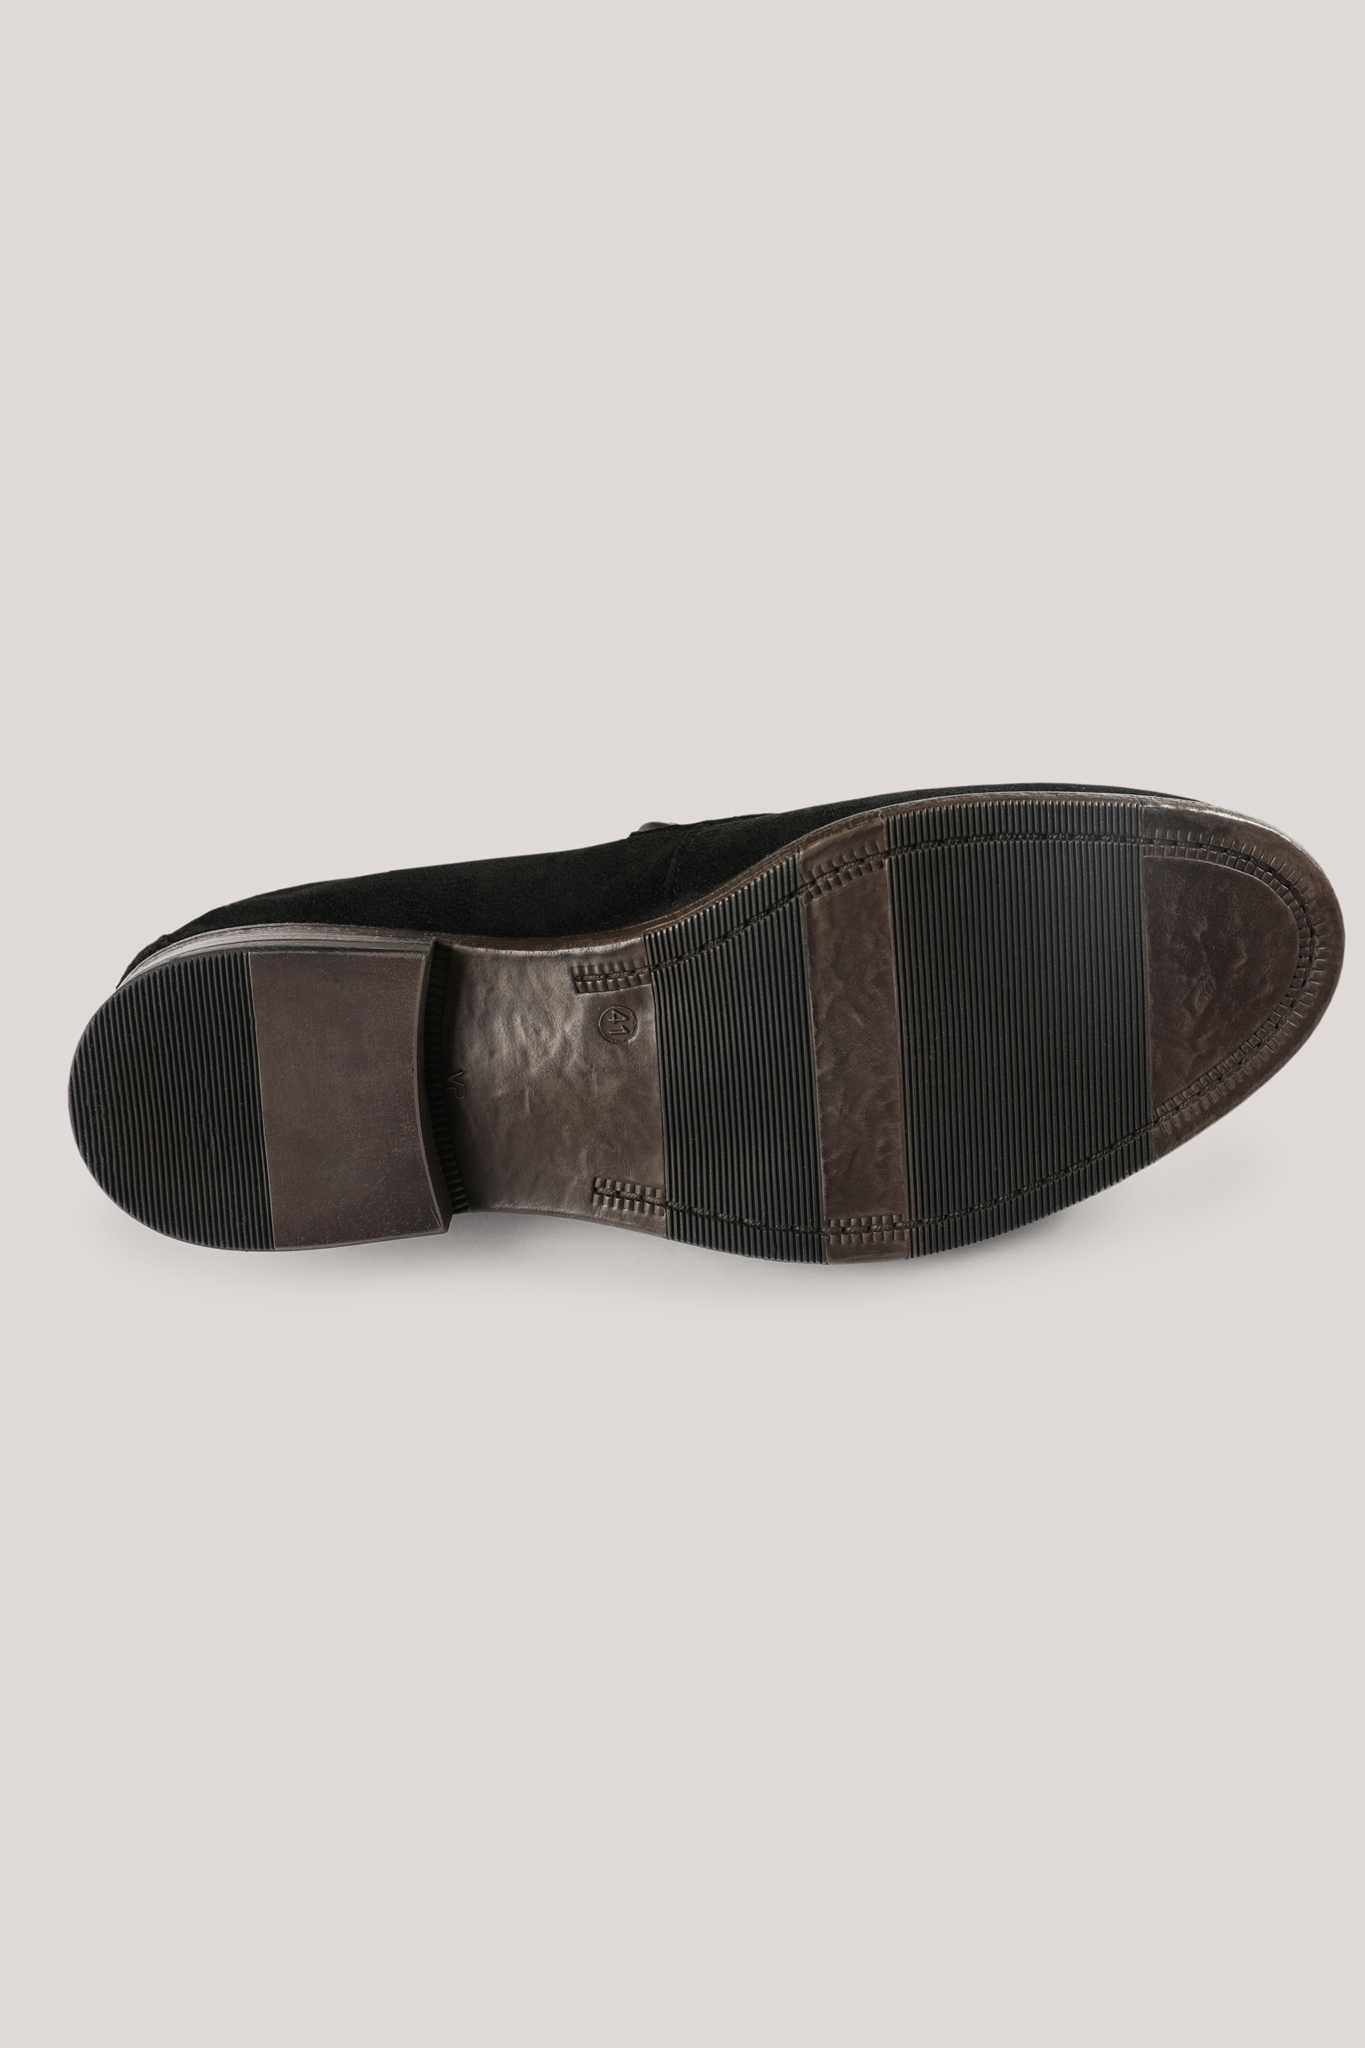 Gisborne Softy Loafer - Chocolate Suede